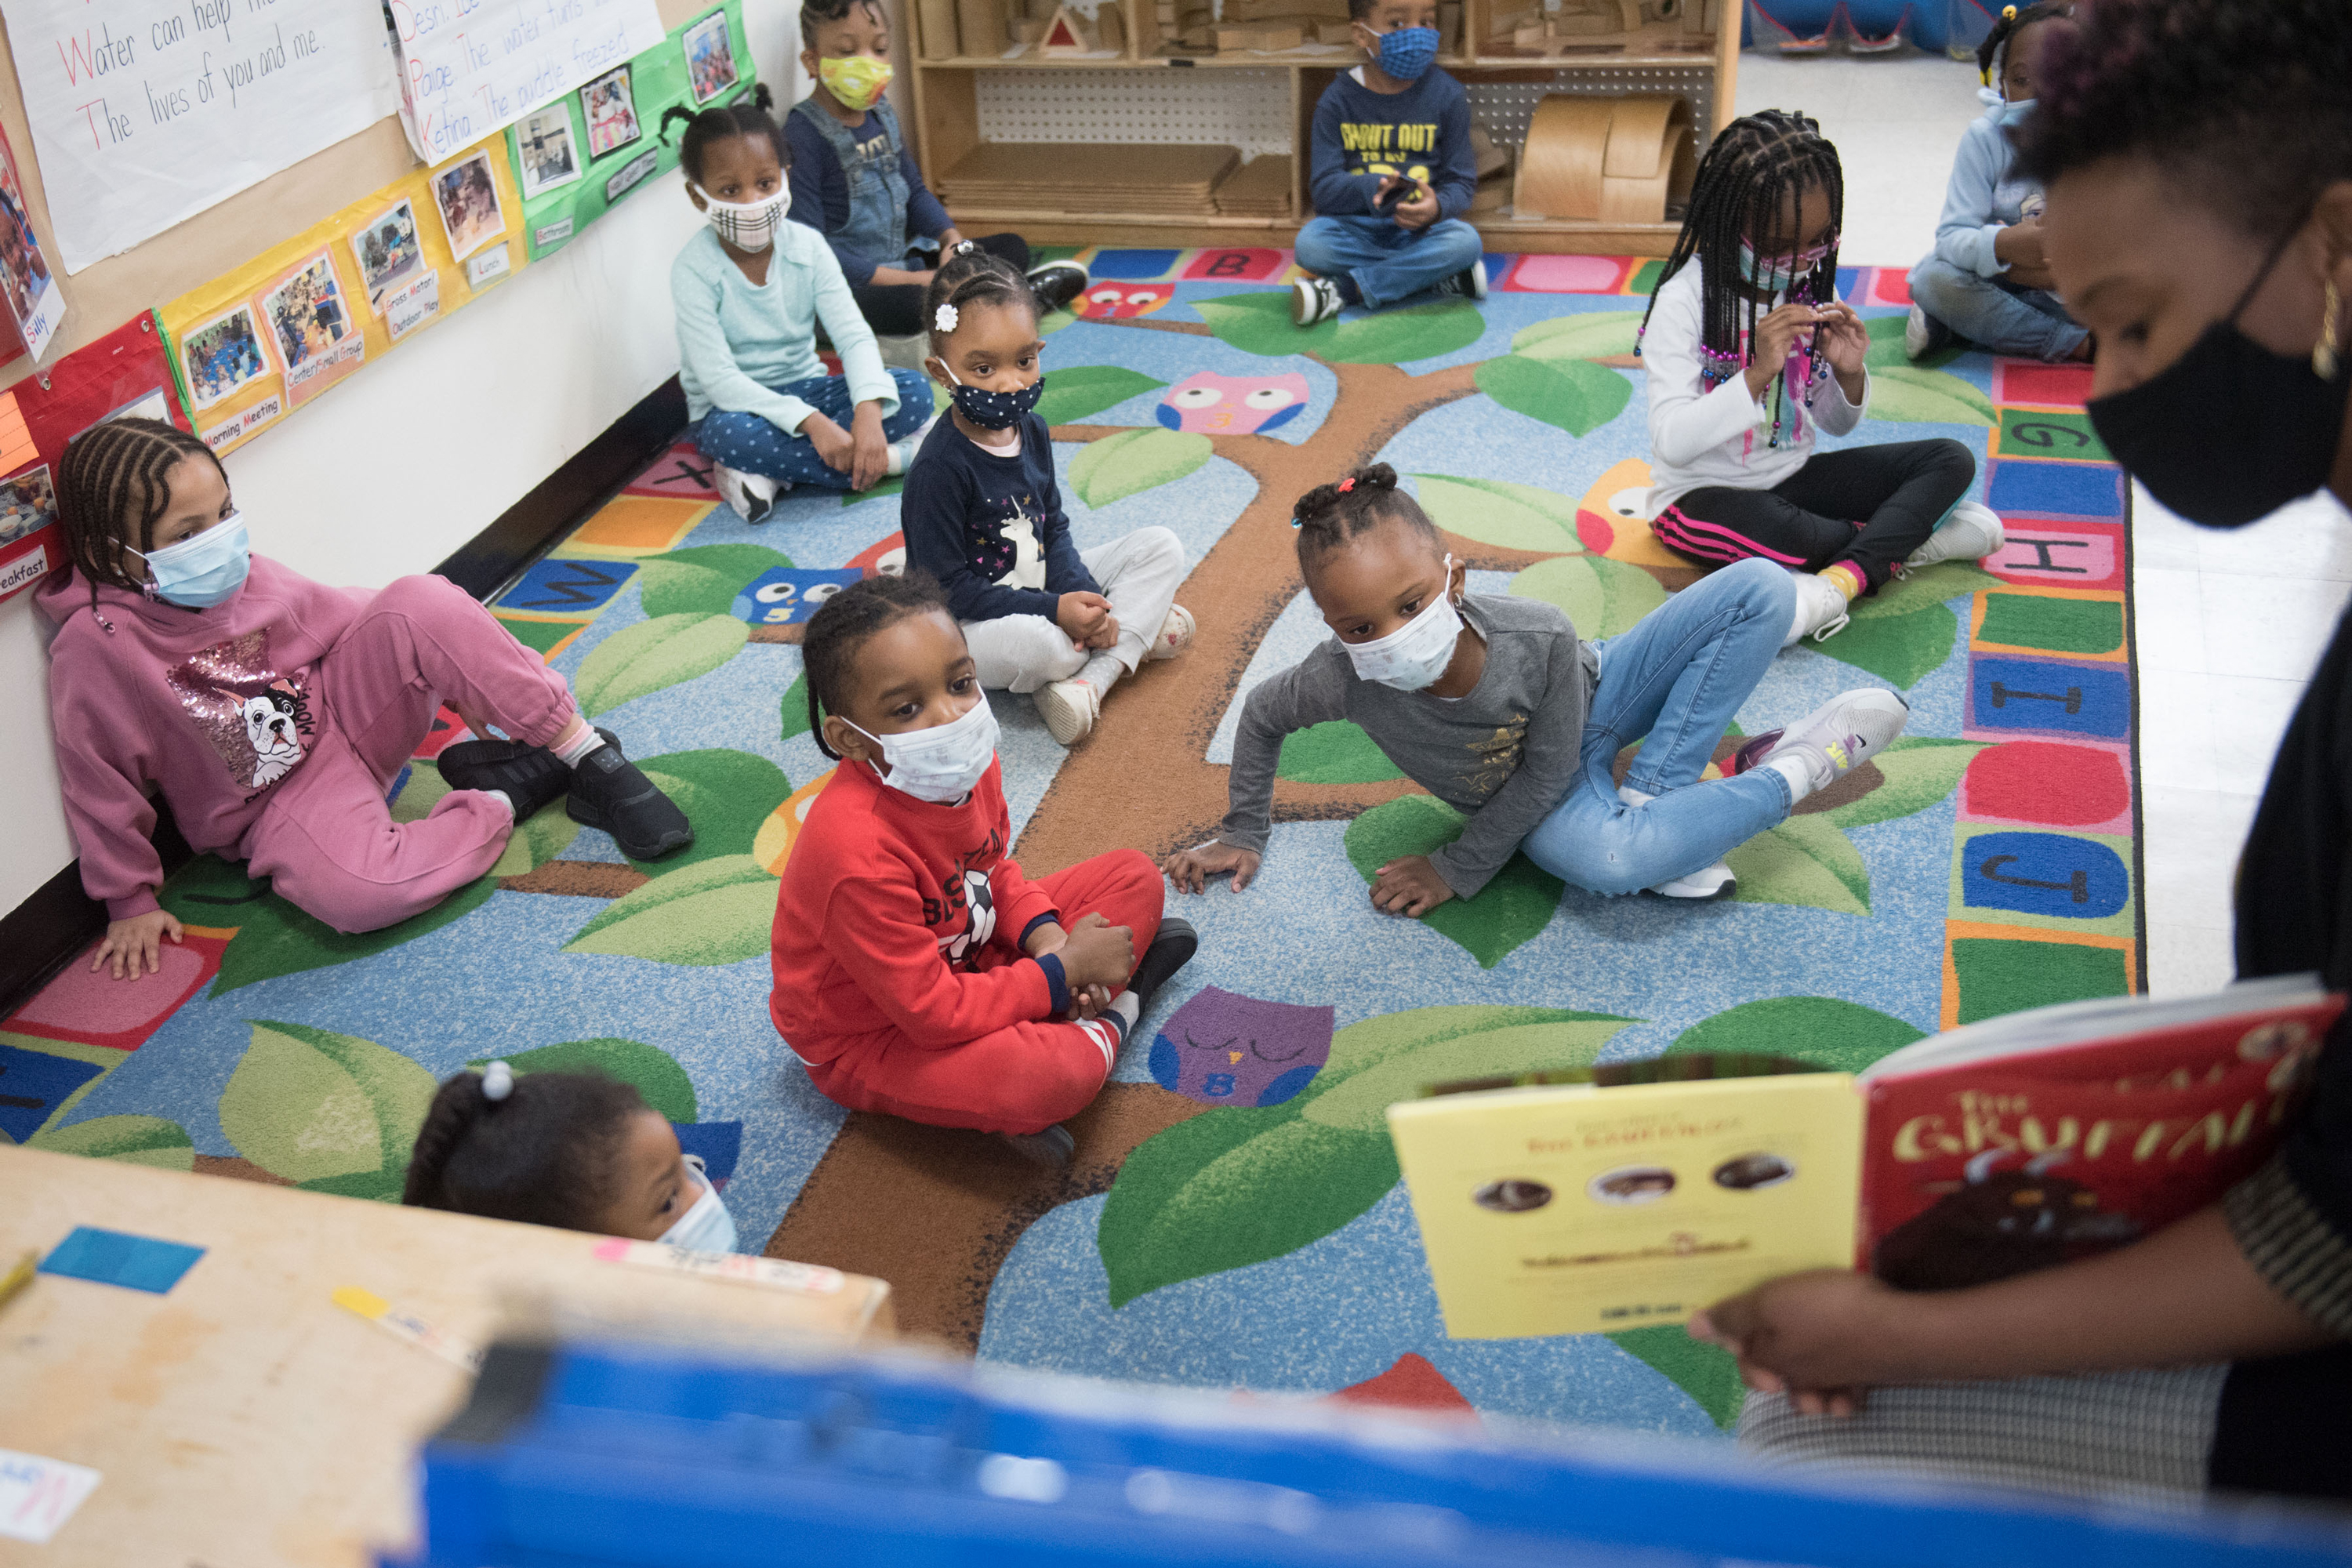 Phyl’s Academy in Brooklyn has 3K and Pre-K programs